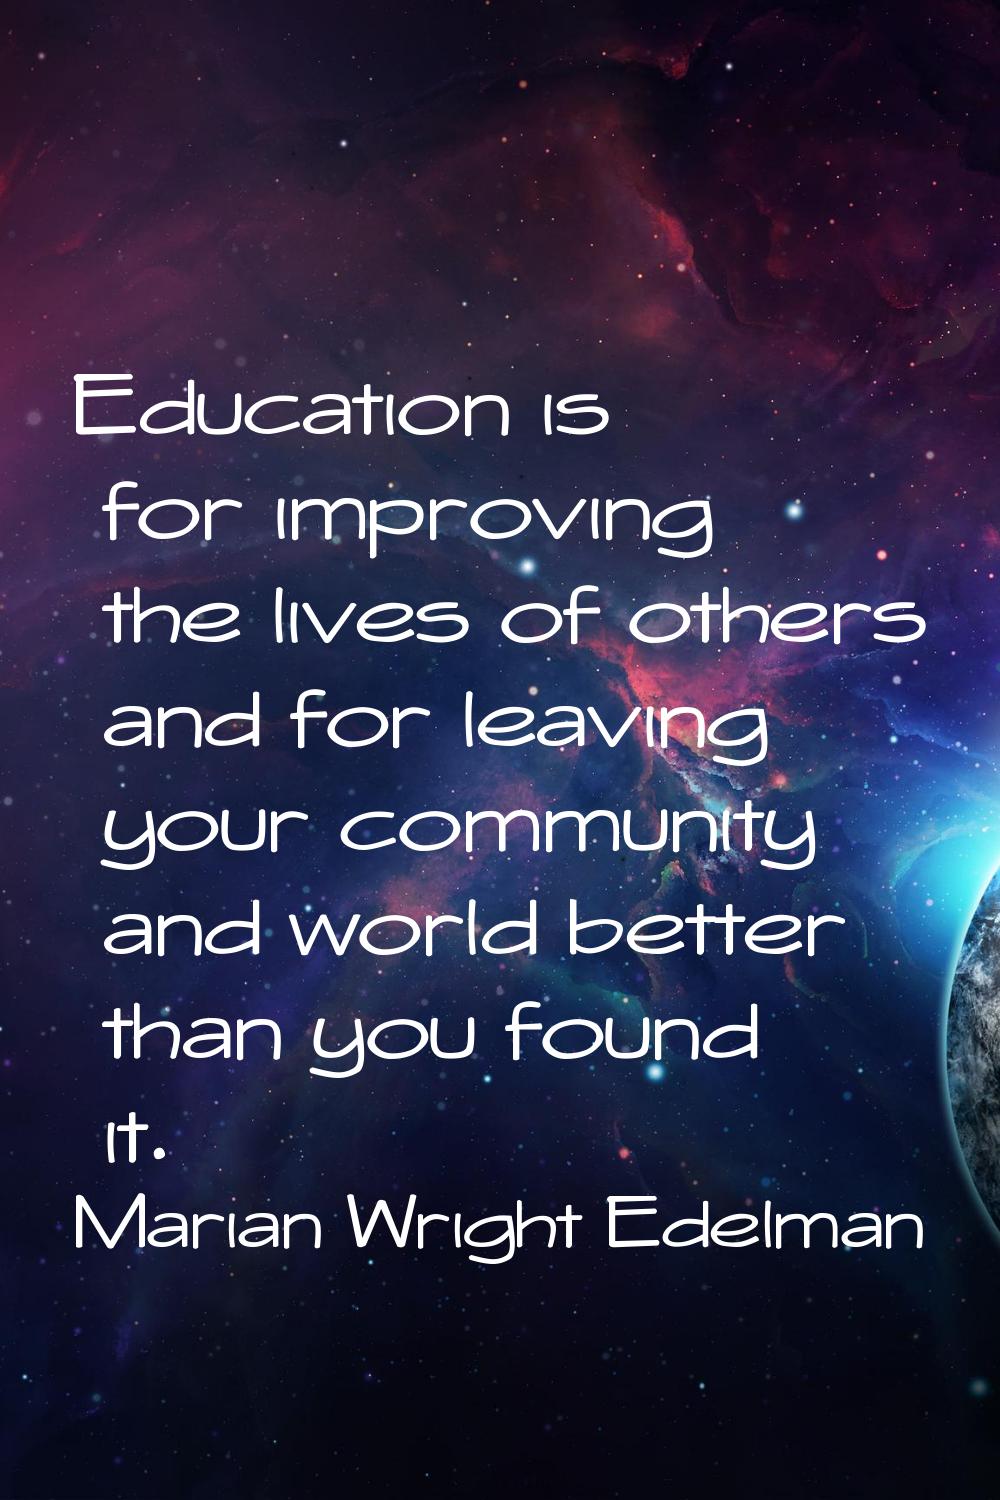 Education is for improving the lives of others and for leaving your community and world better than